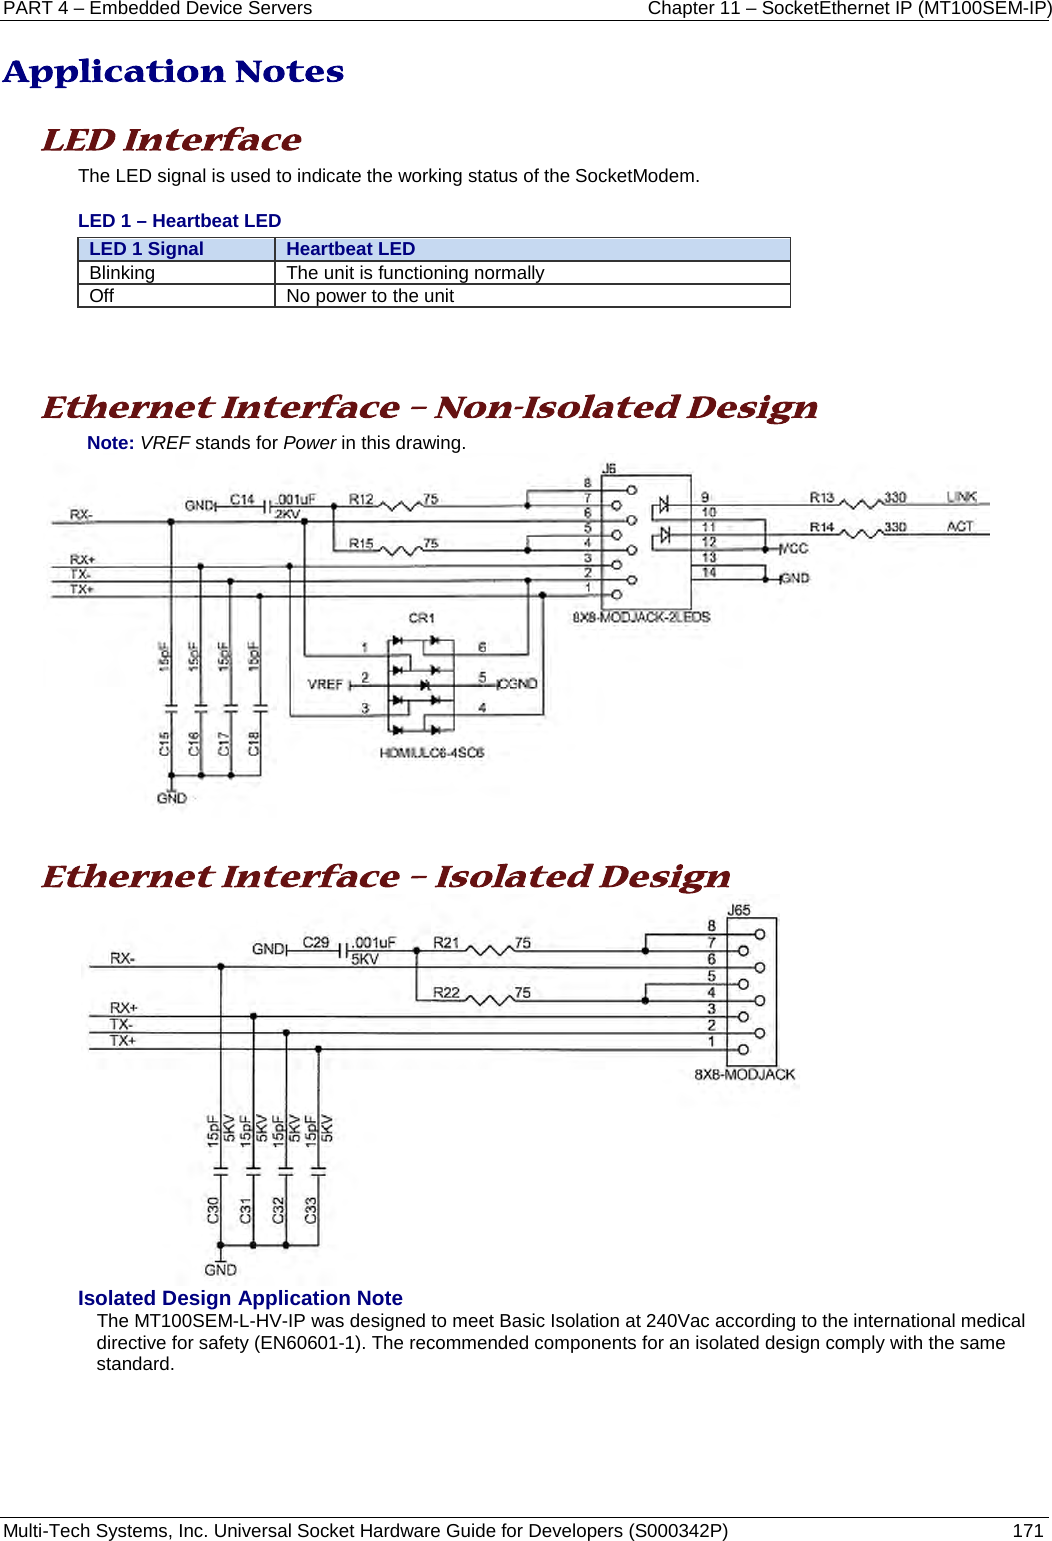 PART 4 – Embedded Device Servers Chapter 11 – SocketEthernet IP (MT100SEM-IP)  Multi-Tech Systems, Inc. Universal Socket Hardware Guide for Developers (S000342P)  171  Application Notes  LED Interface  The LED signal is used to indicate the working status of the SocketModem.  LED 1 – Heartbeat LED LED 1 Signal Heartbeat LED Blinking The unit is functioning normally Off No power to the unit    Ethernet Interface – Non-Isolated Design Note: VREF stands for Power in this drawing.    Ethernet Interface – Isolated Design  Isolated Design Application Note The MT100SEM-L-HV-IP was designed to meet Basic Isolation at 240Vac according to the international medical directive for safety (EN60601-1). The recommended components for an isolated design comply with the same standard.     